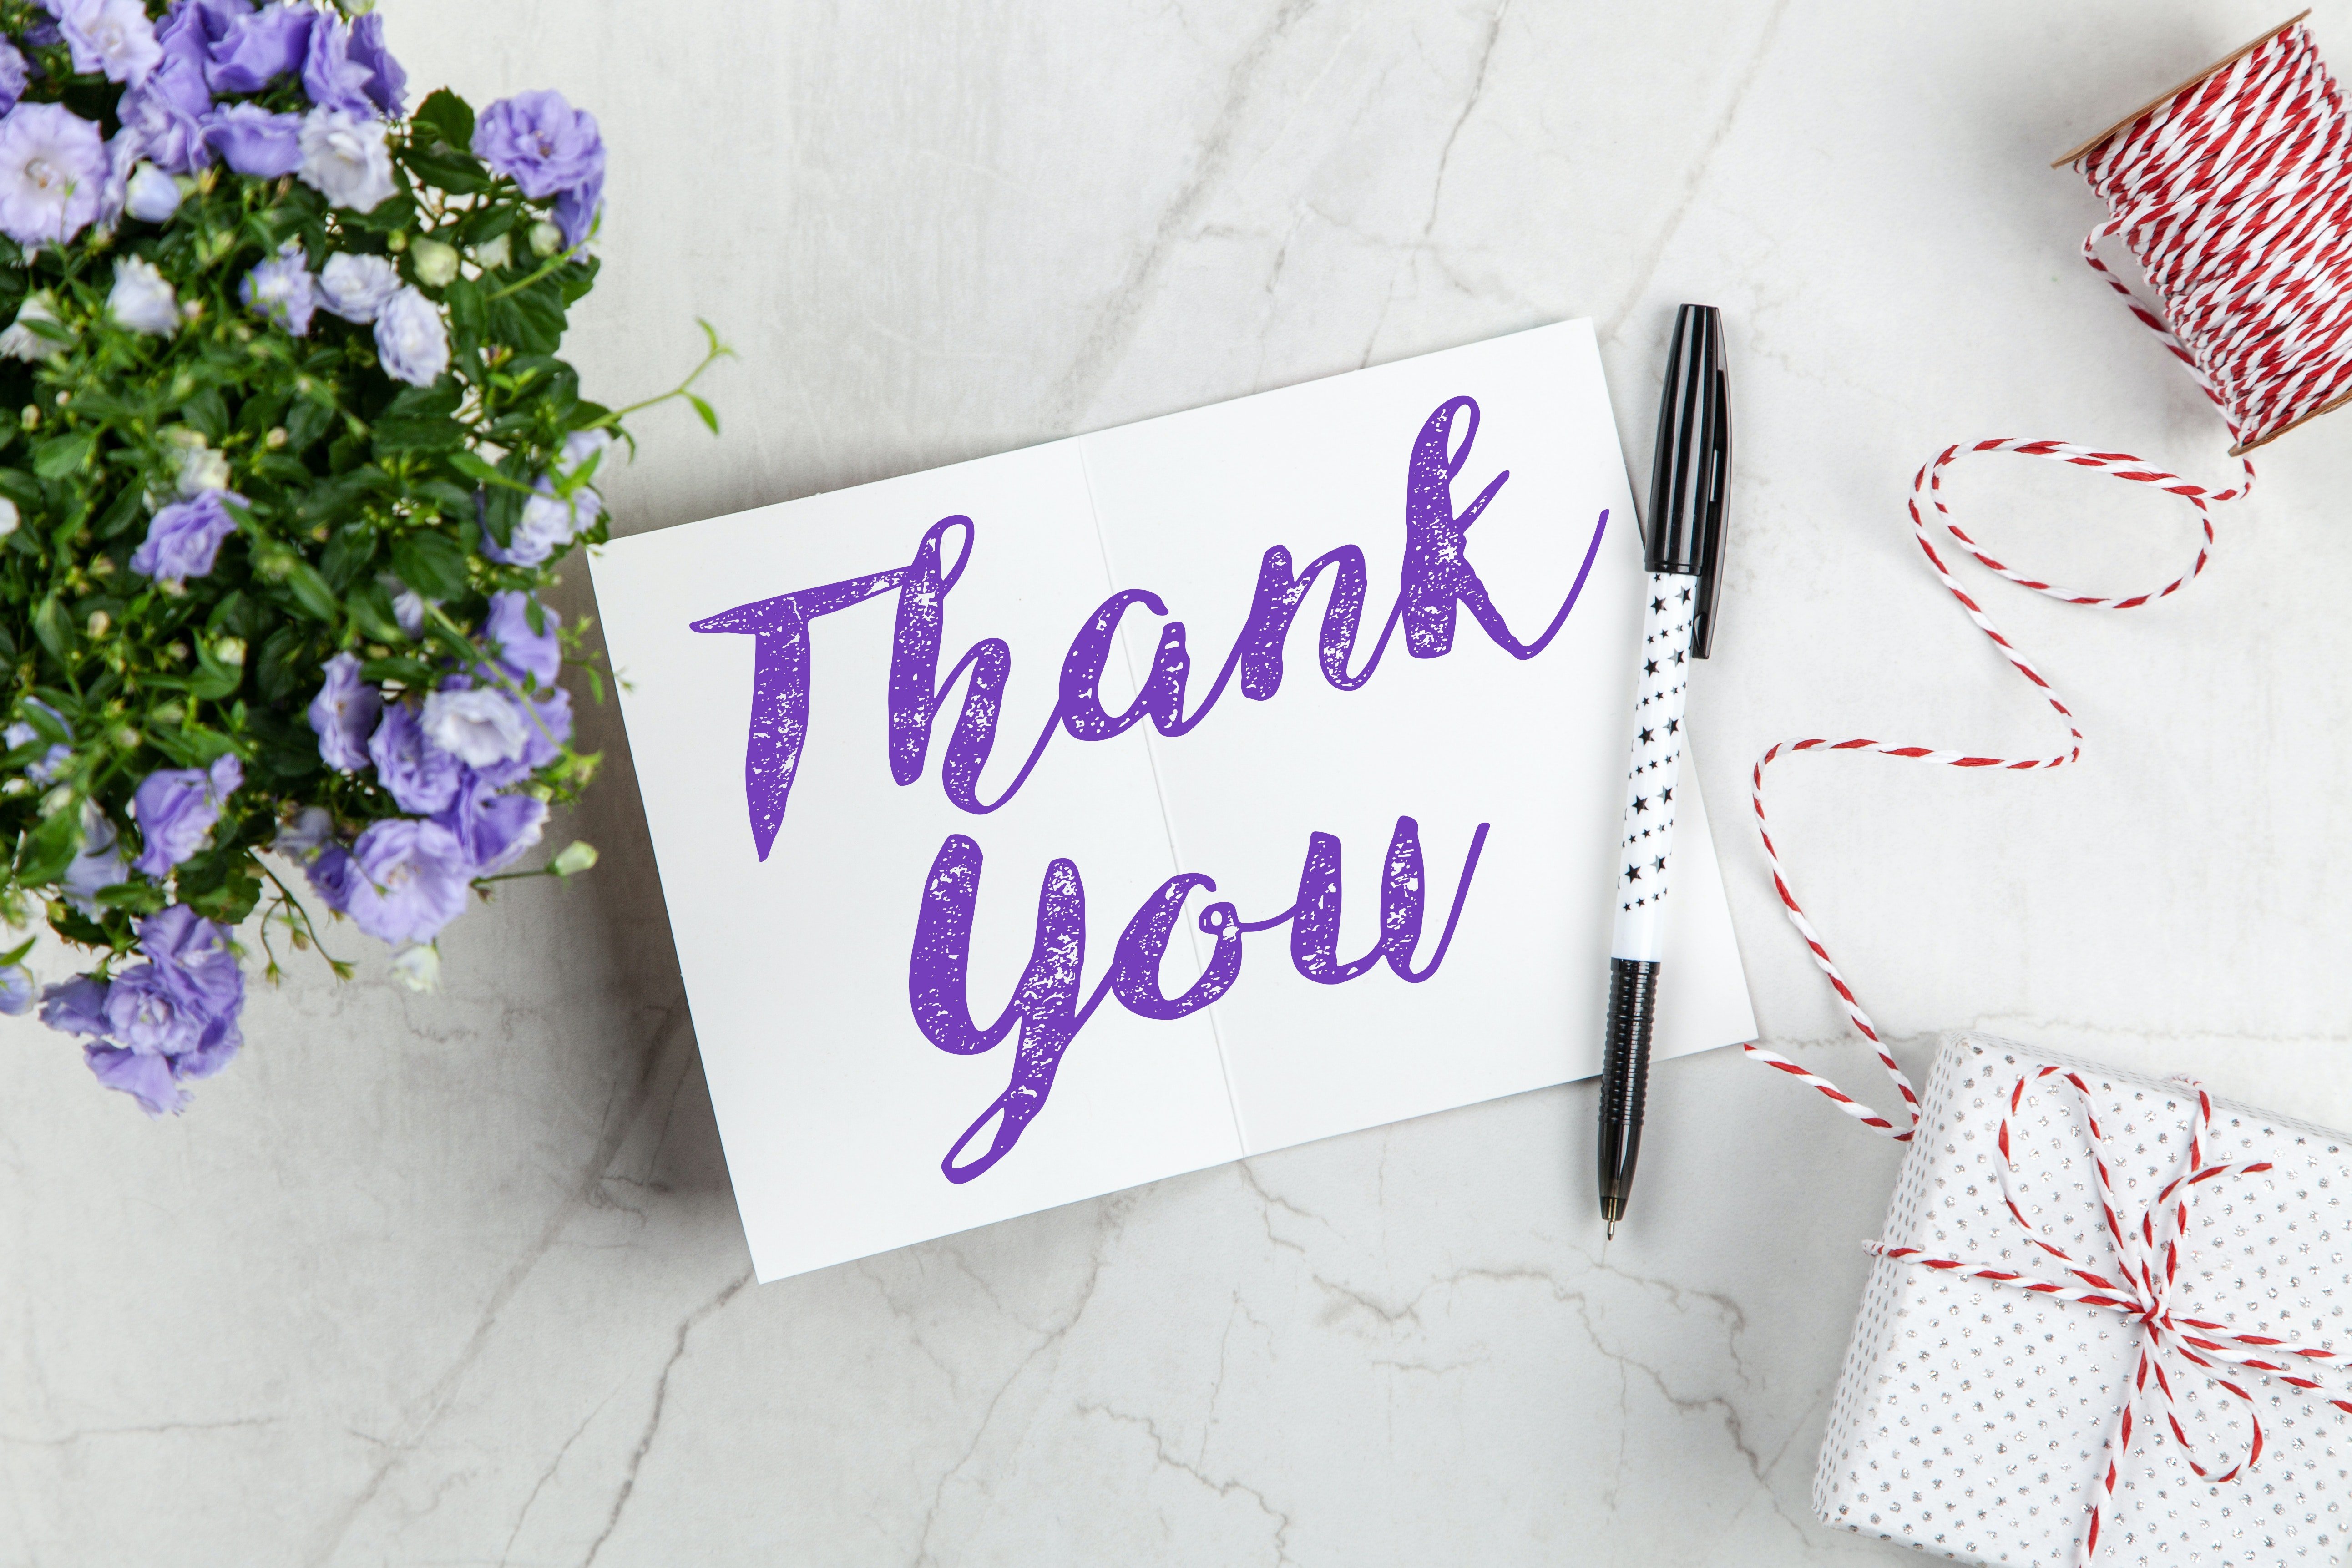 A thank you note to show gratitude | Source: Pexels